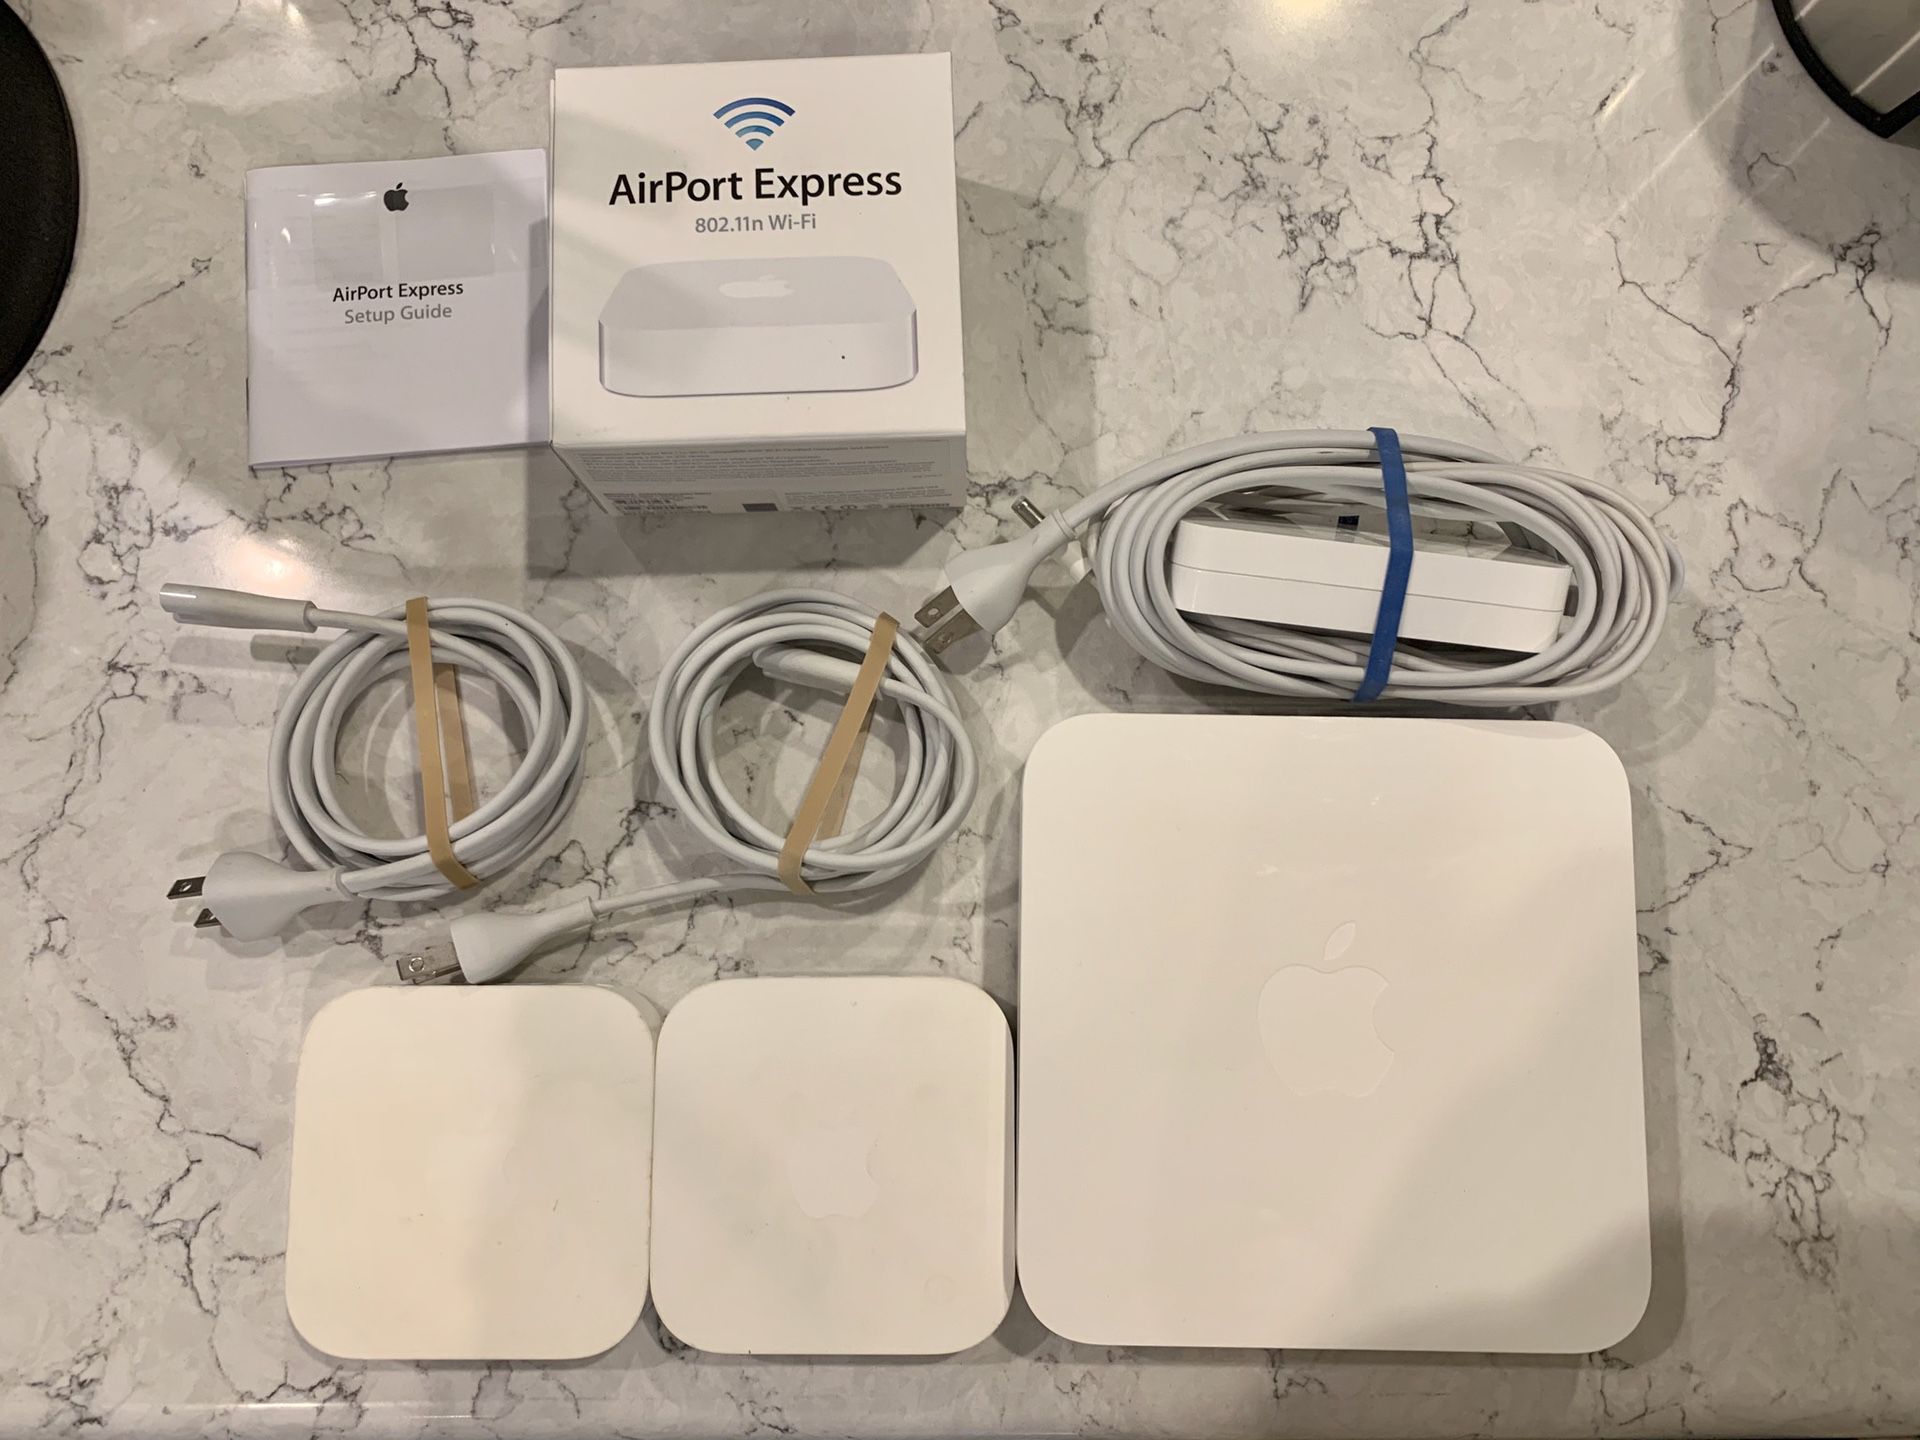 Apple AirPort Base Station Router Internet WiFi Access Point